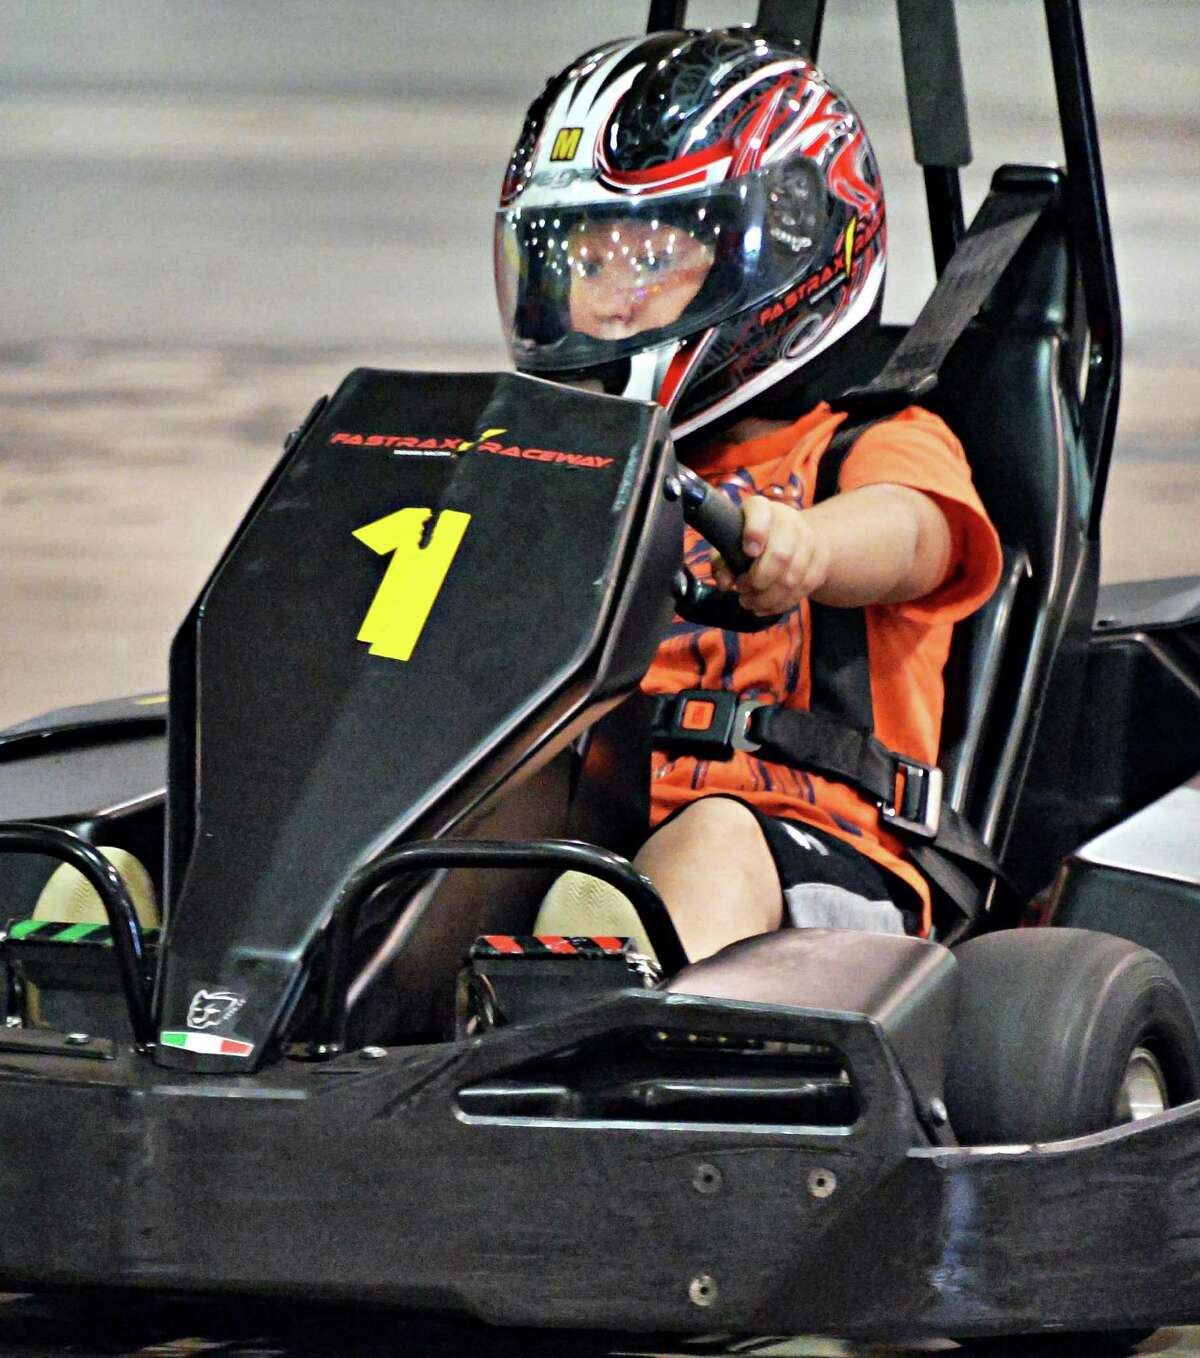 Nine-year-old Cameron Bee of Voorheesville races a go-cart at FasTrax Raceway in Crossgates Commons Tuesday July 29, 2014, in Albany, NY. (John Carl D'Annibale / Times Union)